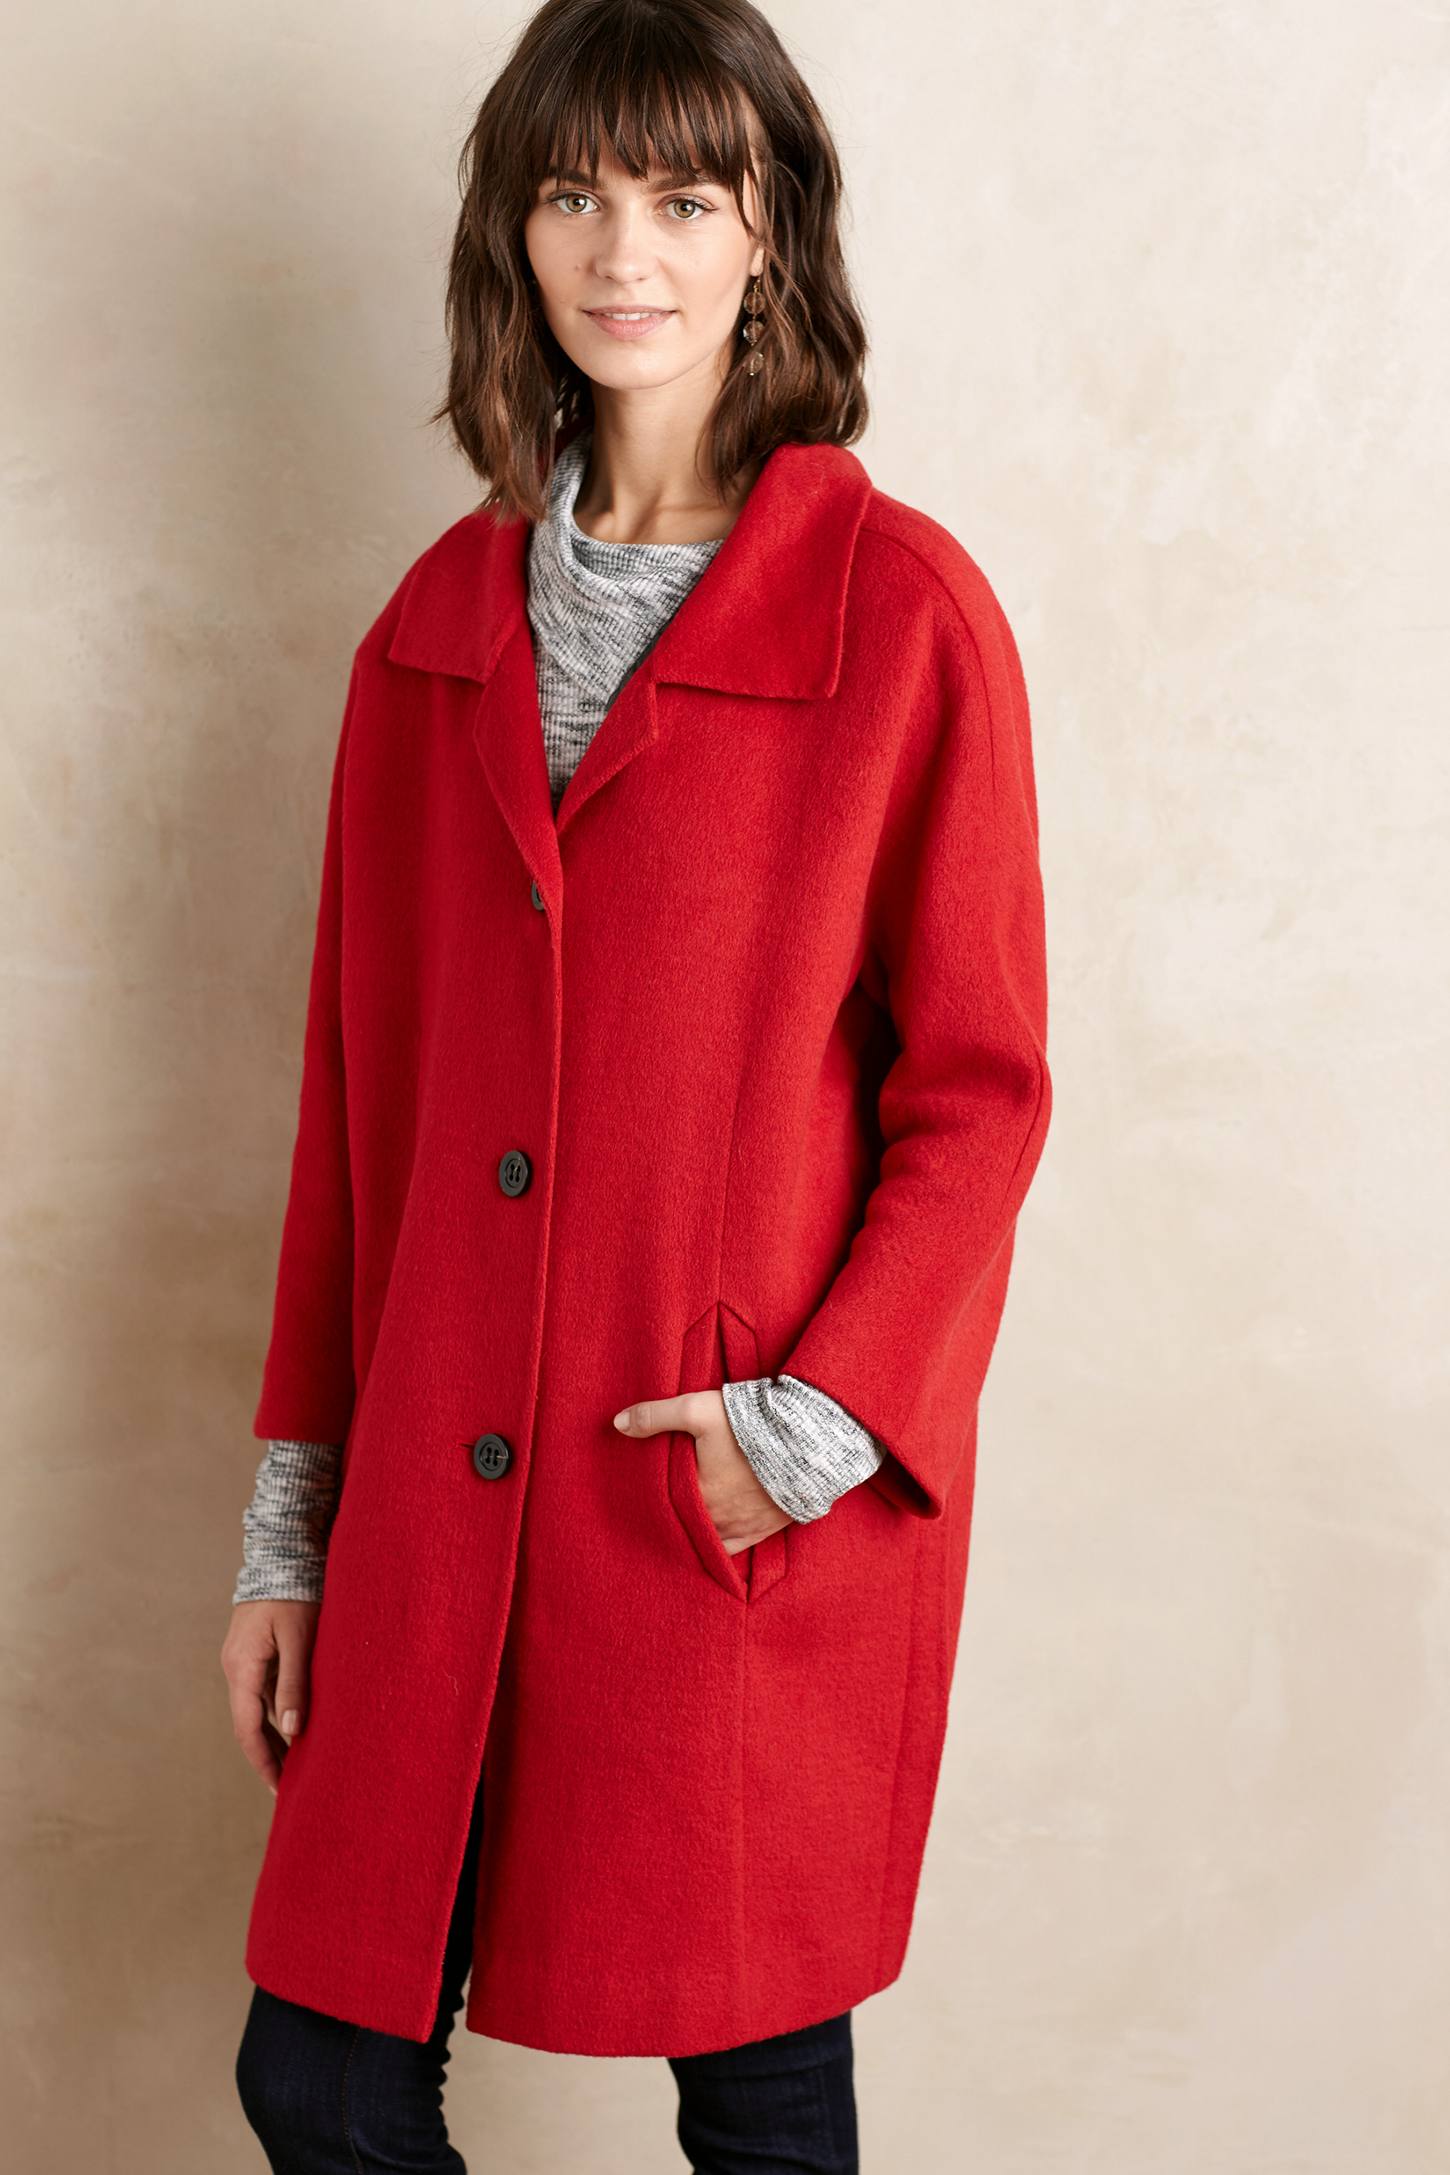 Anthropologie's New Arrivals: Your Fall Wardrobe - Topista